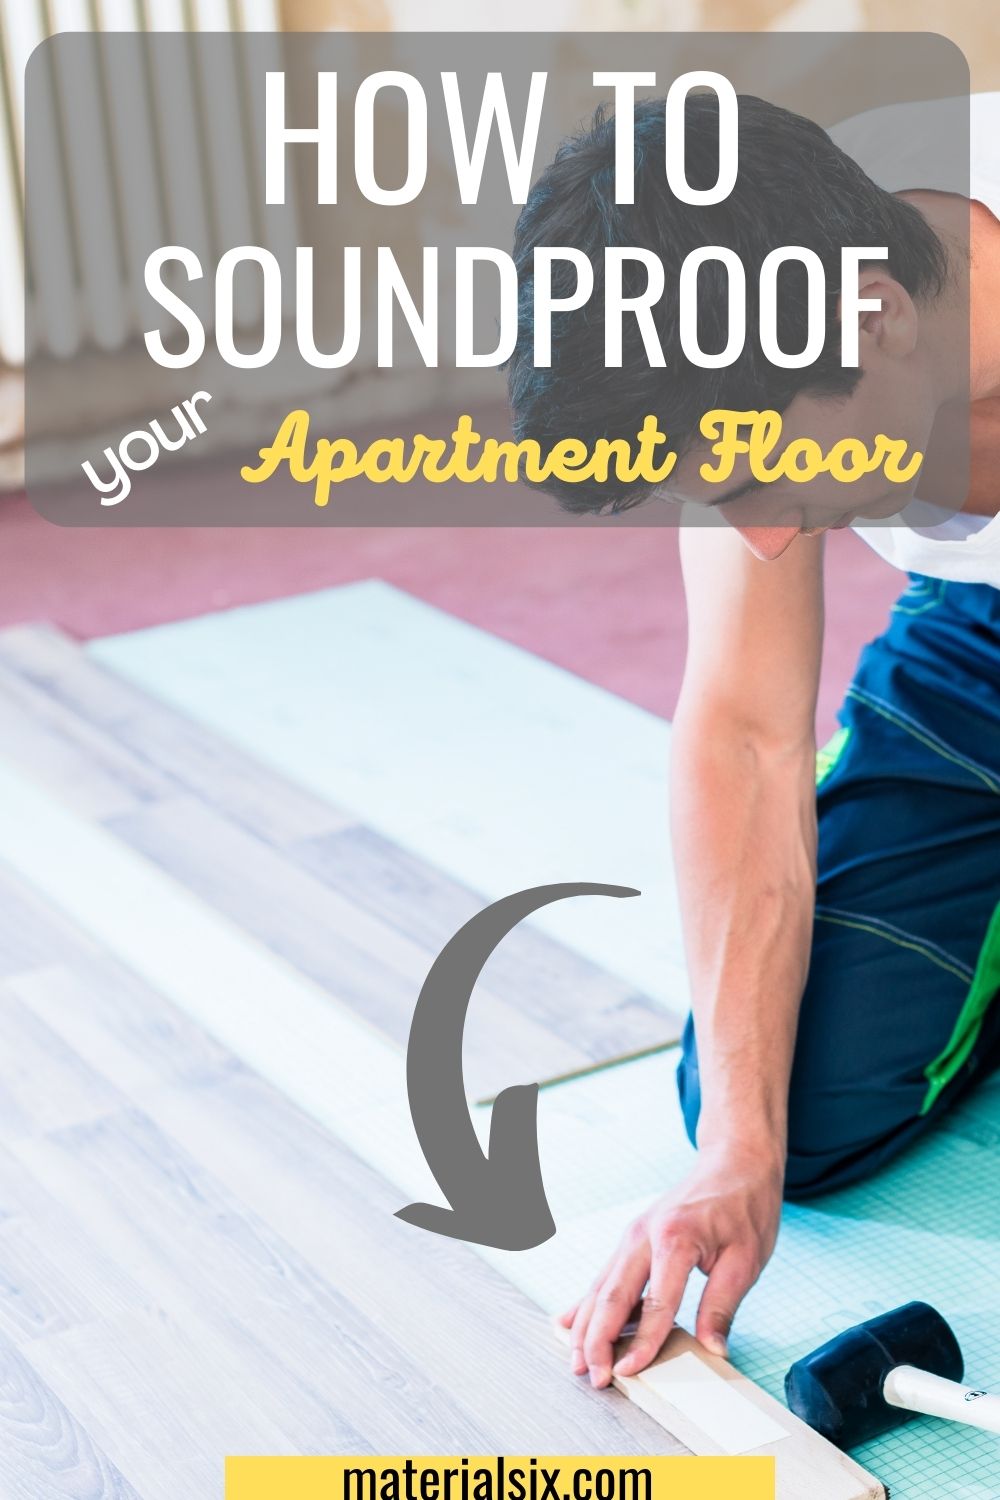 How to Soundproof a Floor in an Apartment